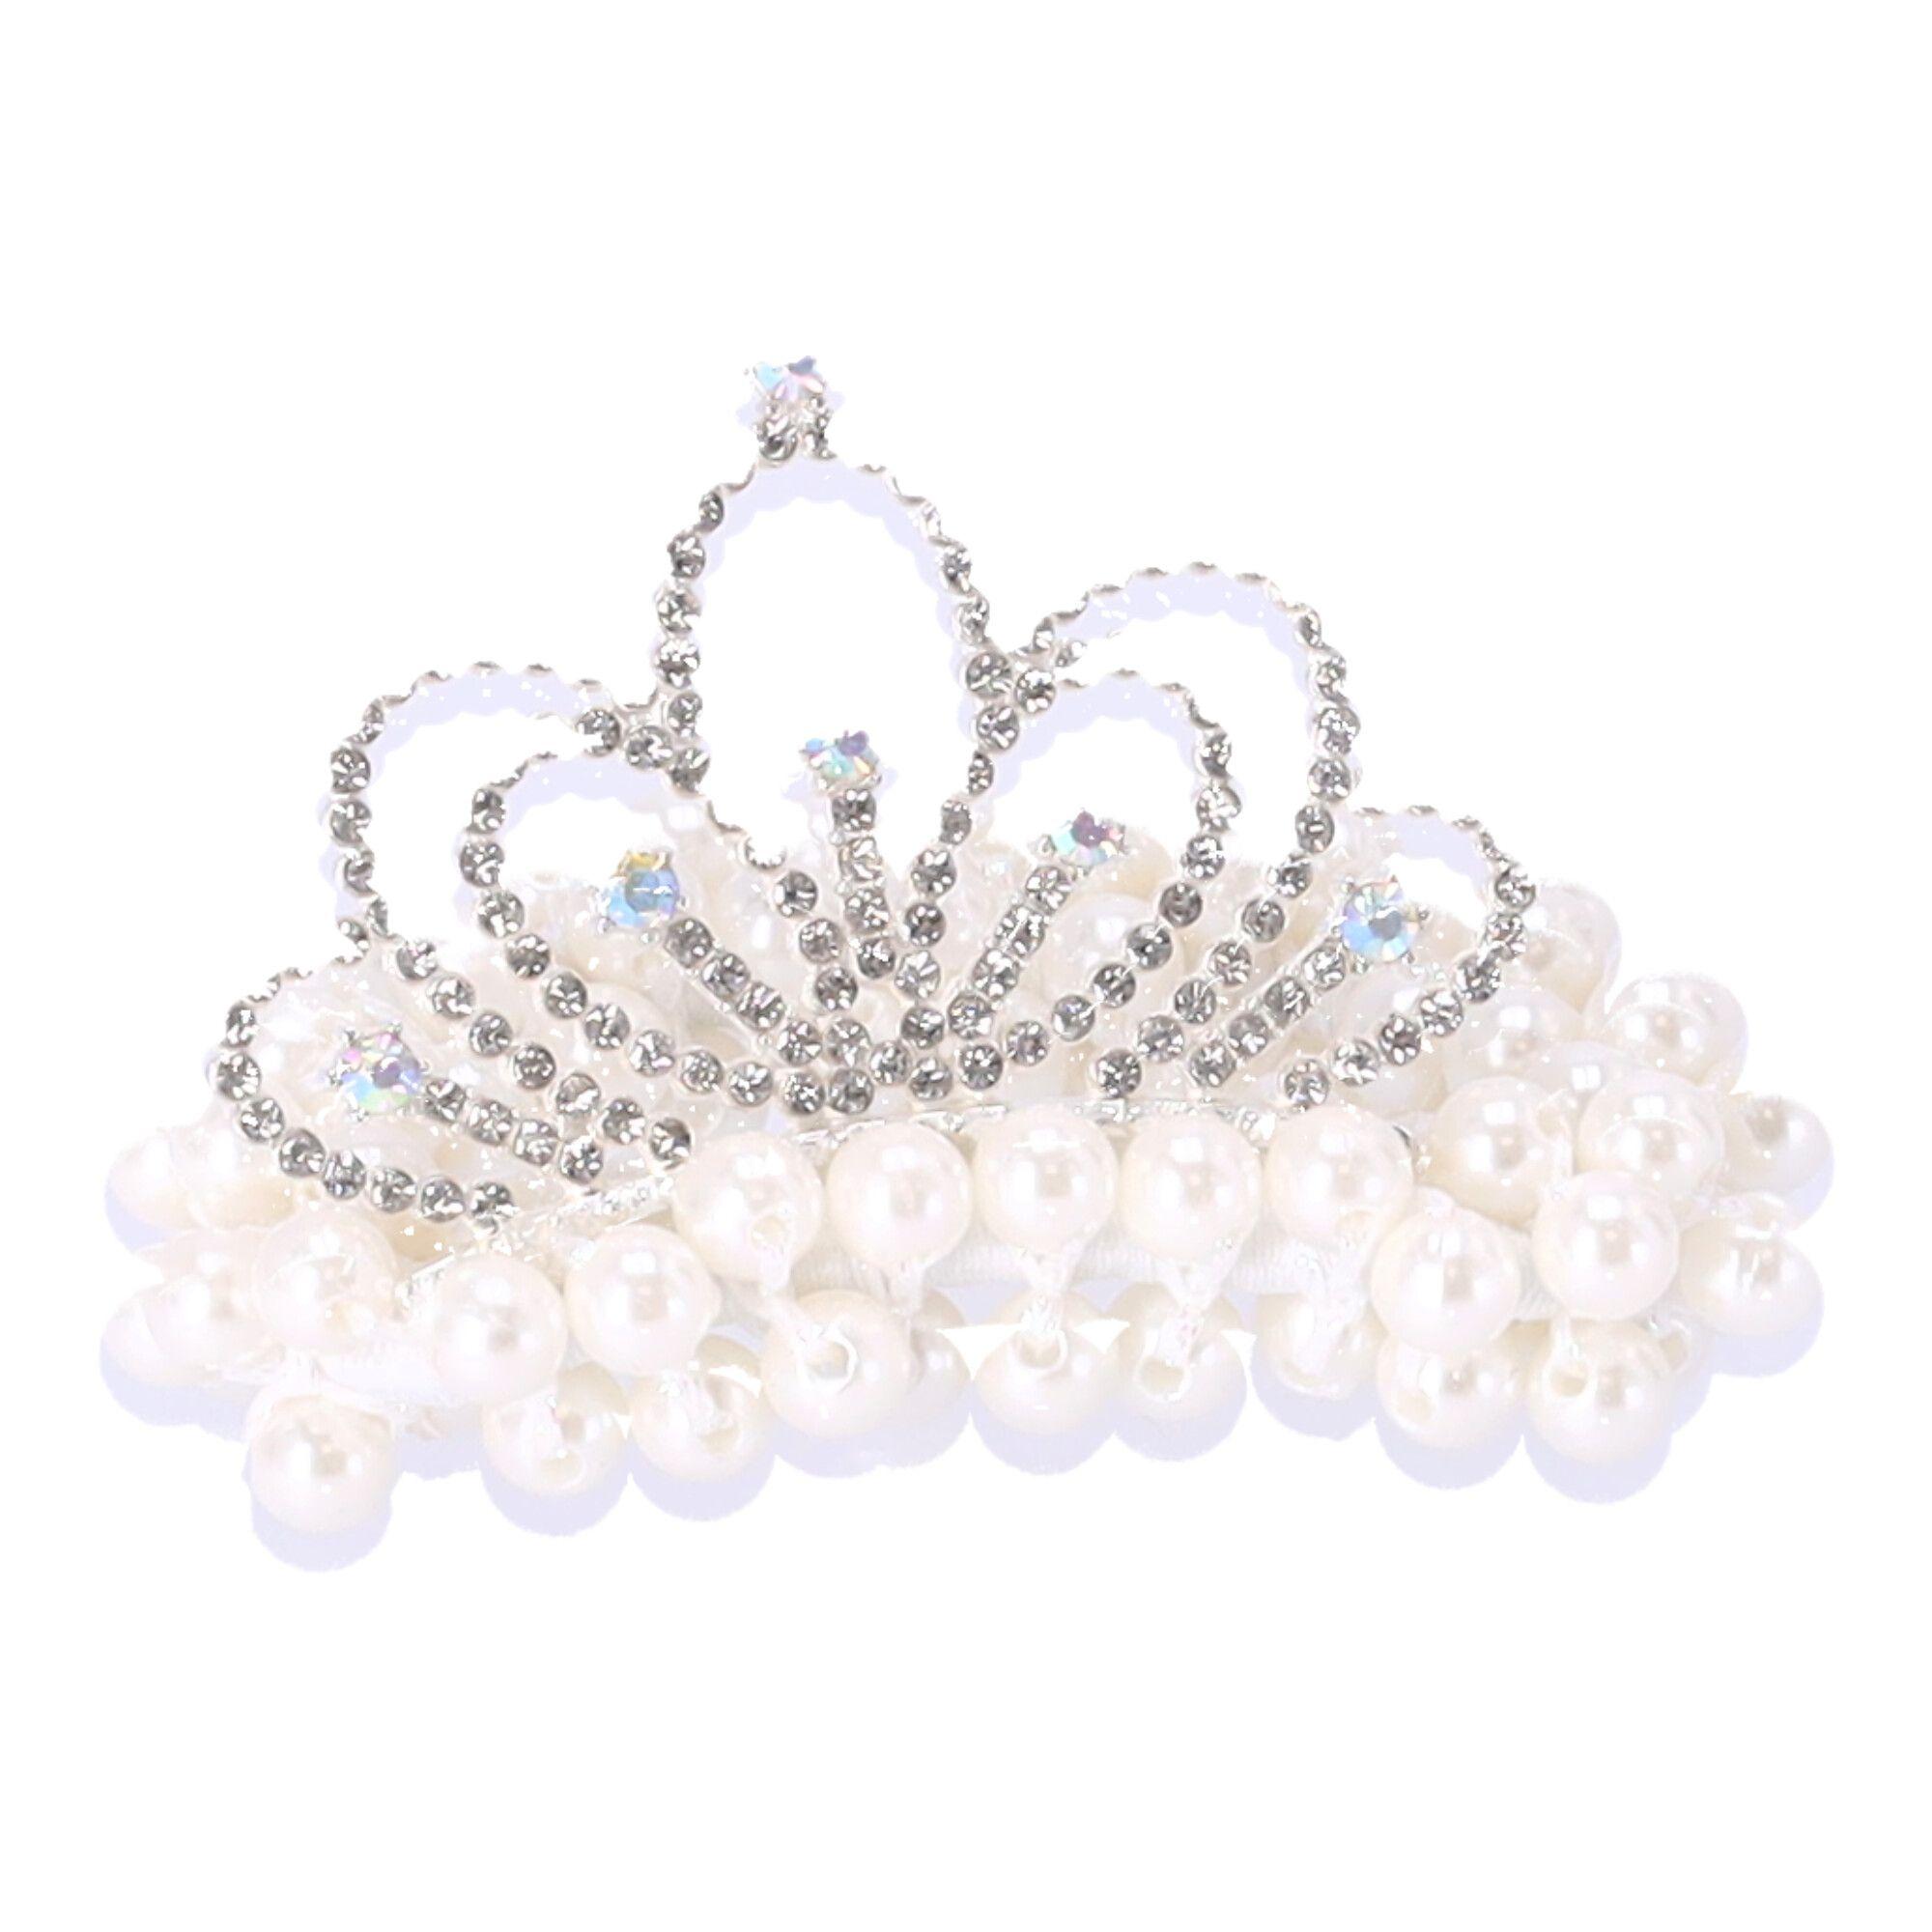 Decorative rubber band with pearls and crown - type 3